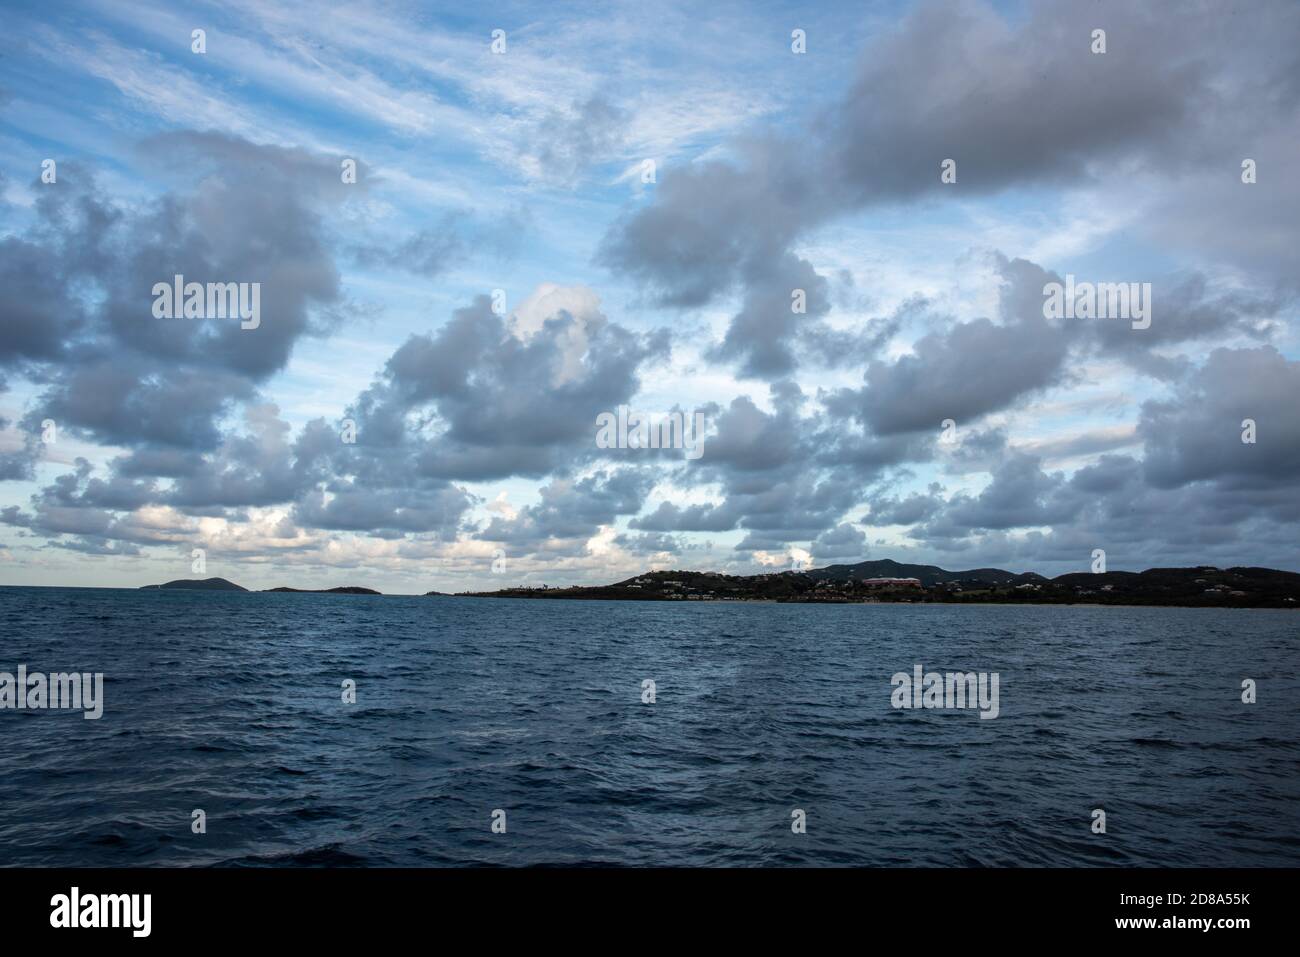 View from the Caribbean Sea into the rolling landscape of St. Croix at dusk under a cloudy sky. Stock Photo